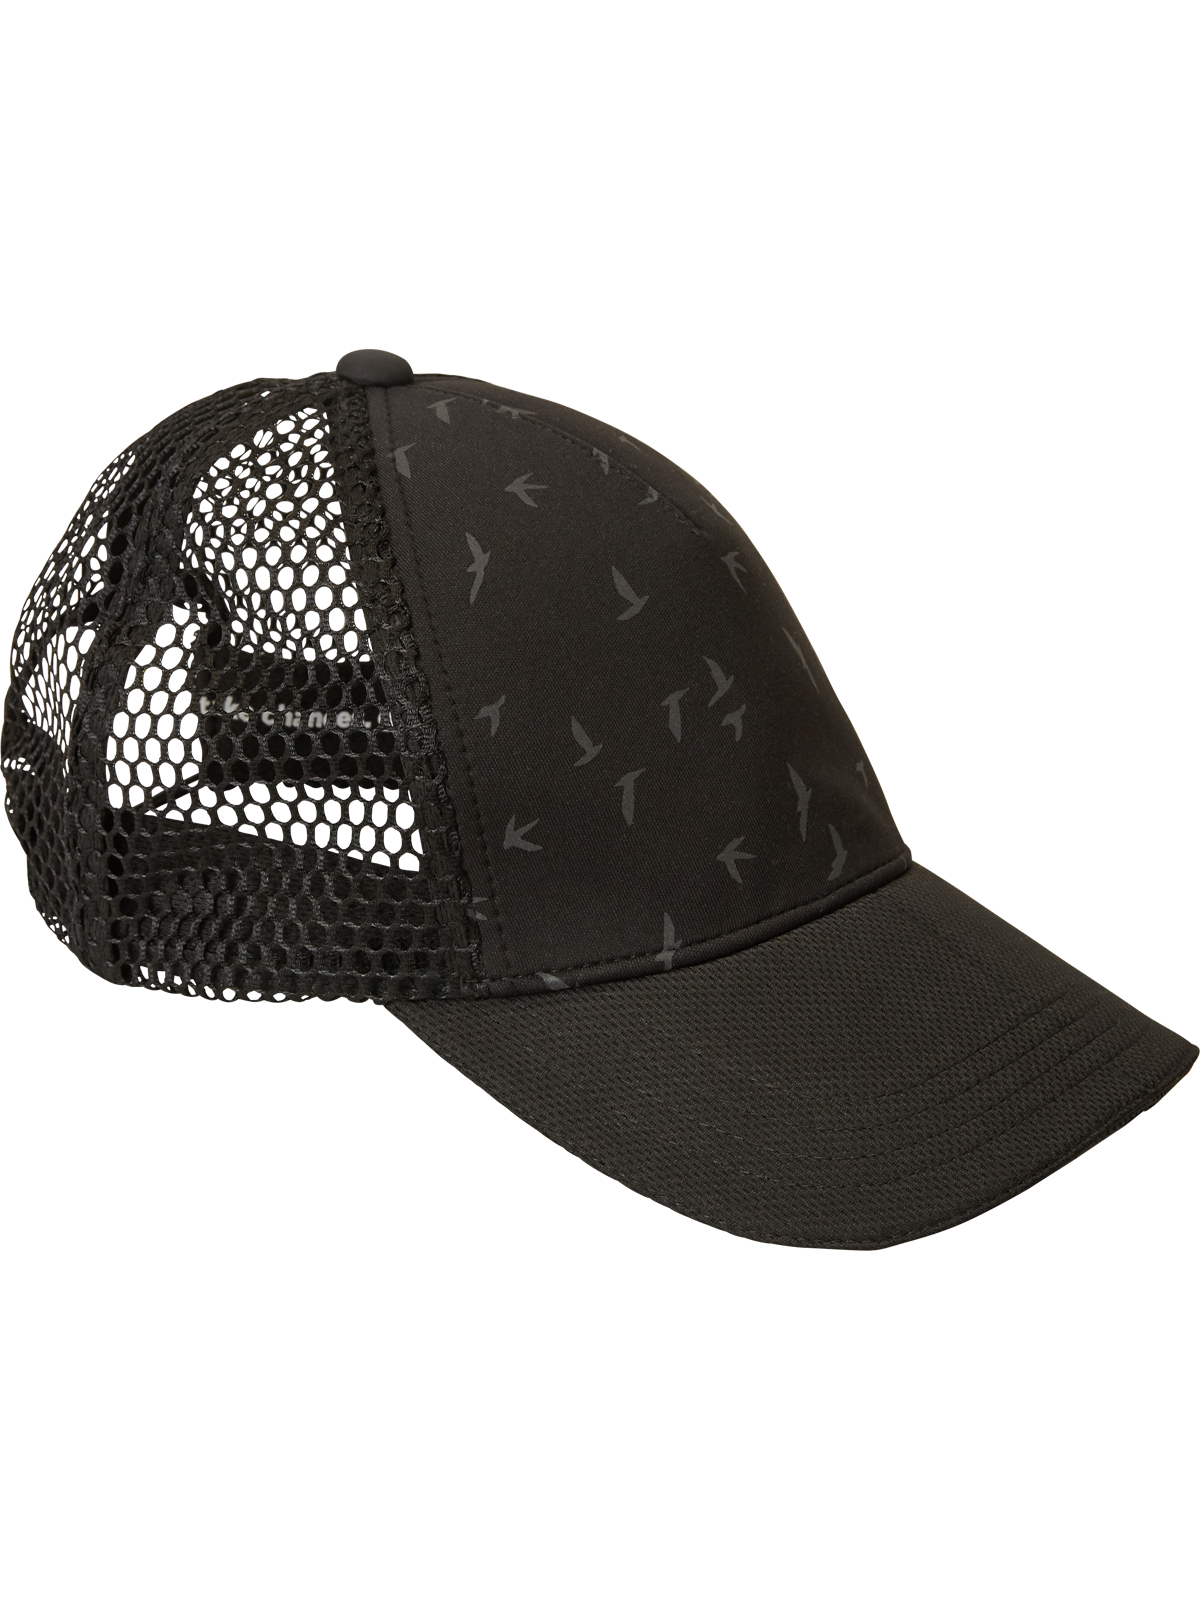 Oiselle Running Trucker Hat with Reflective | Title Nine